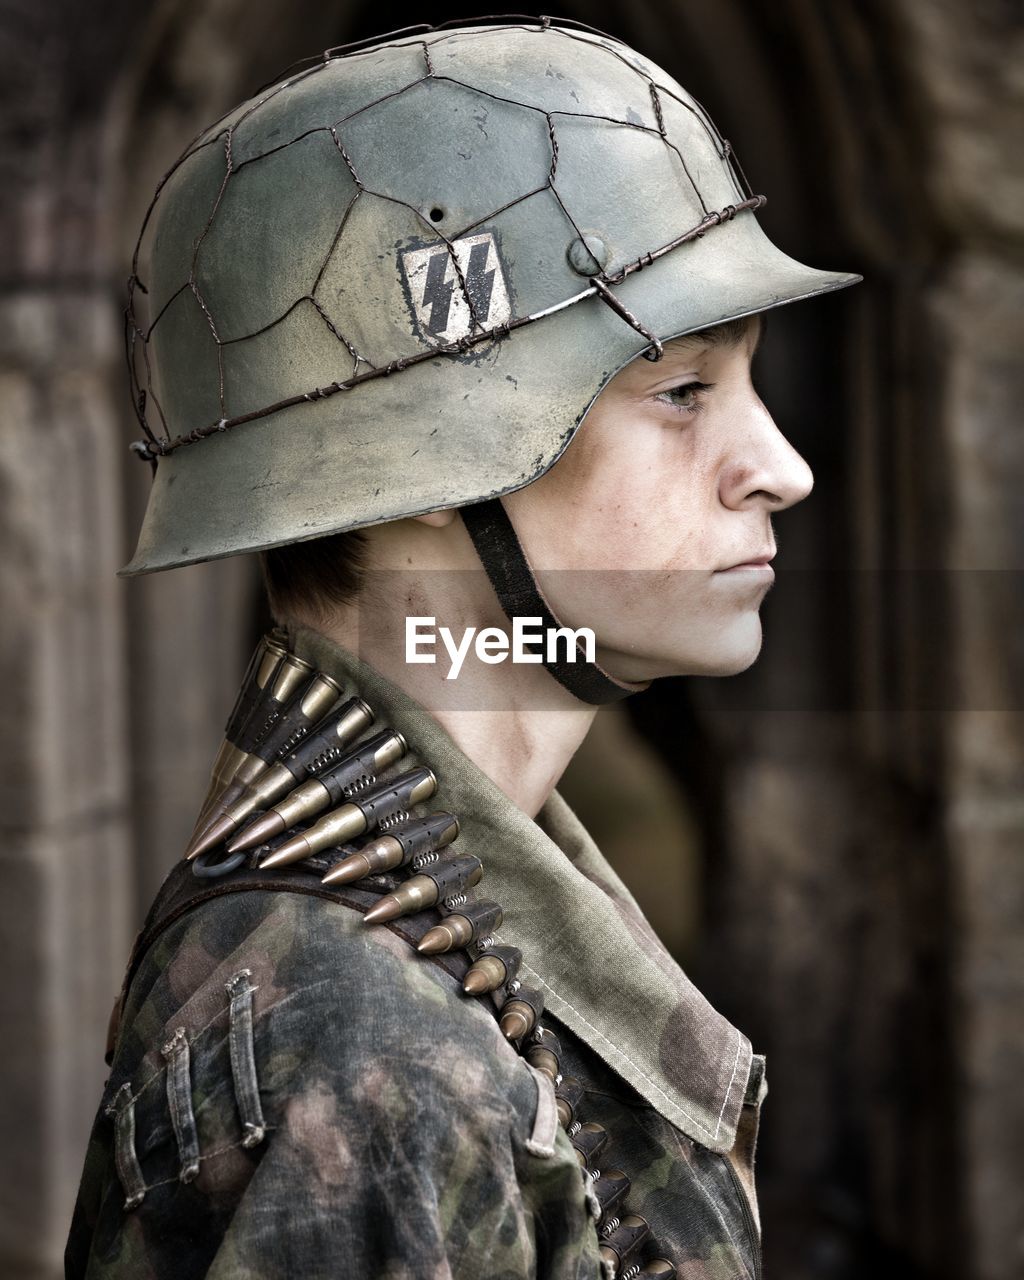 Profile view of young soldier wearing helmet and bullets